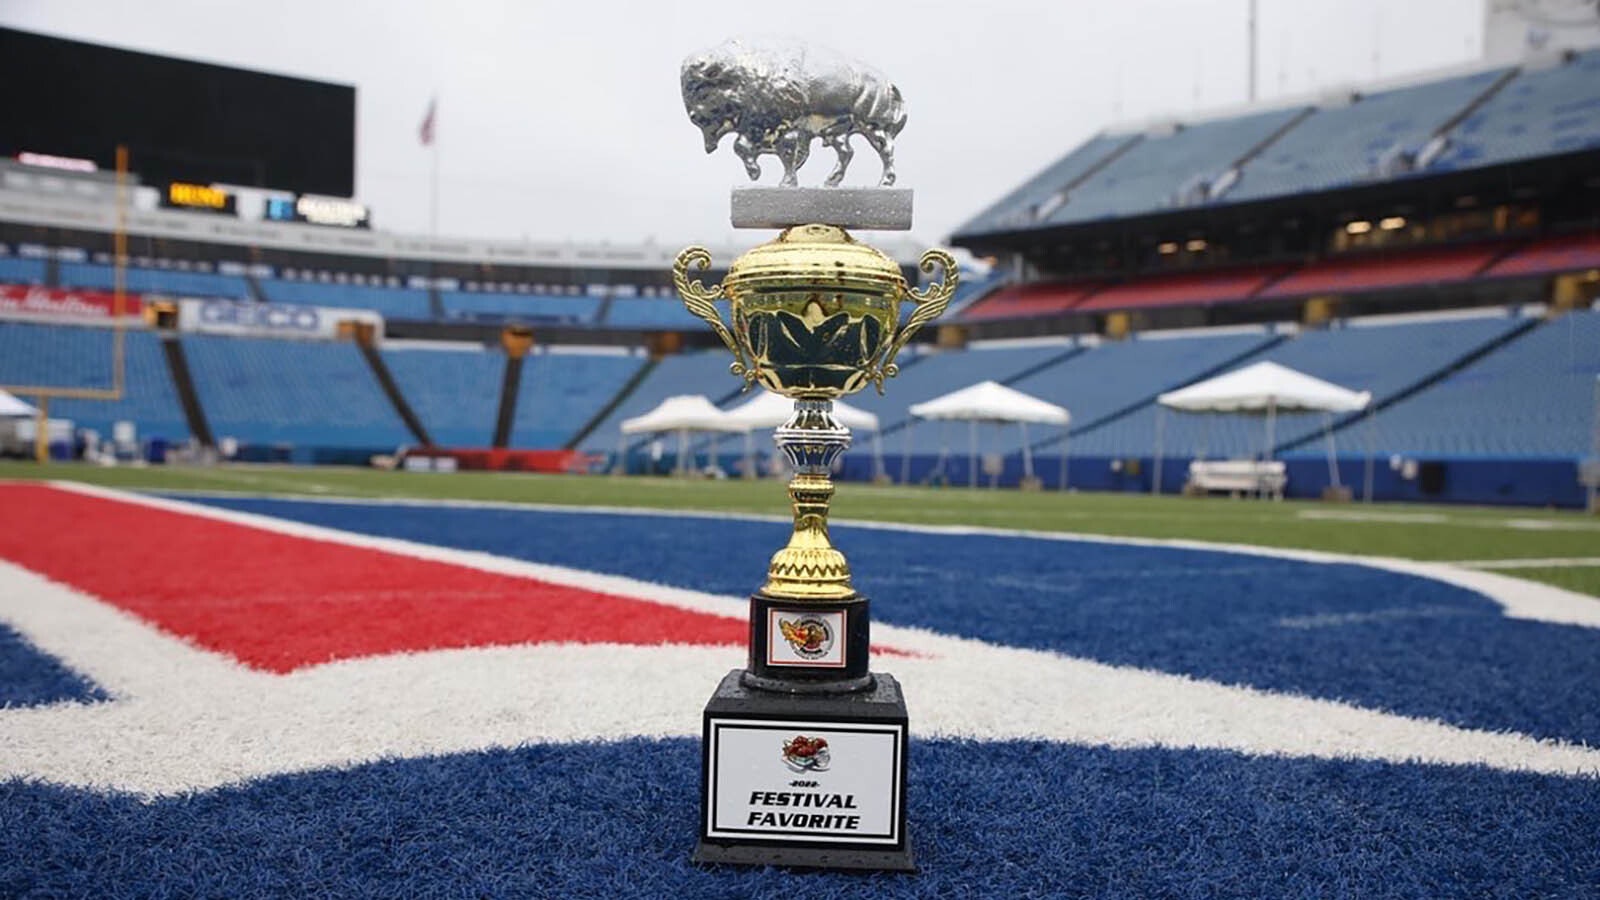 Josh Allen isn't the only Laramie, Wyoming, product to compete at the Bills stadium in Buffalo.